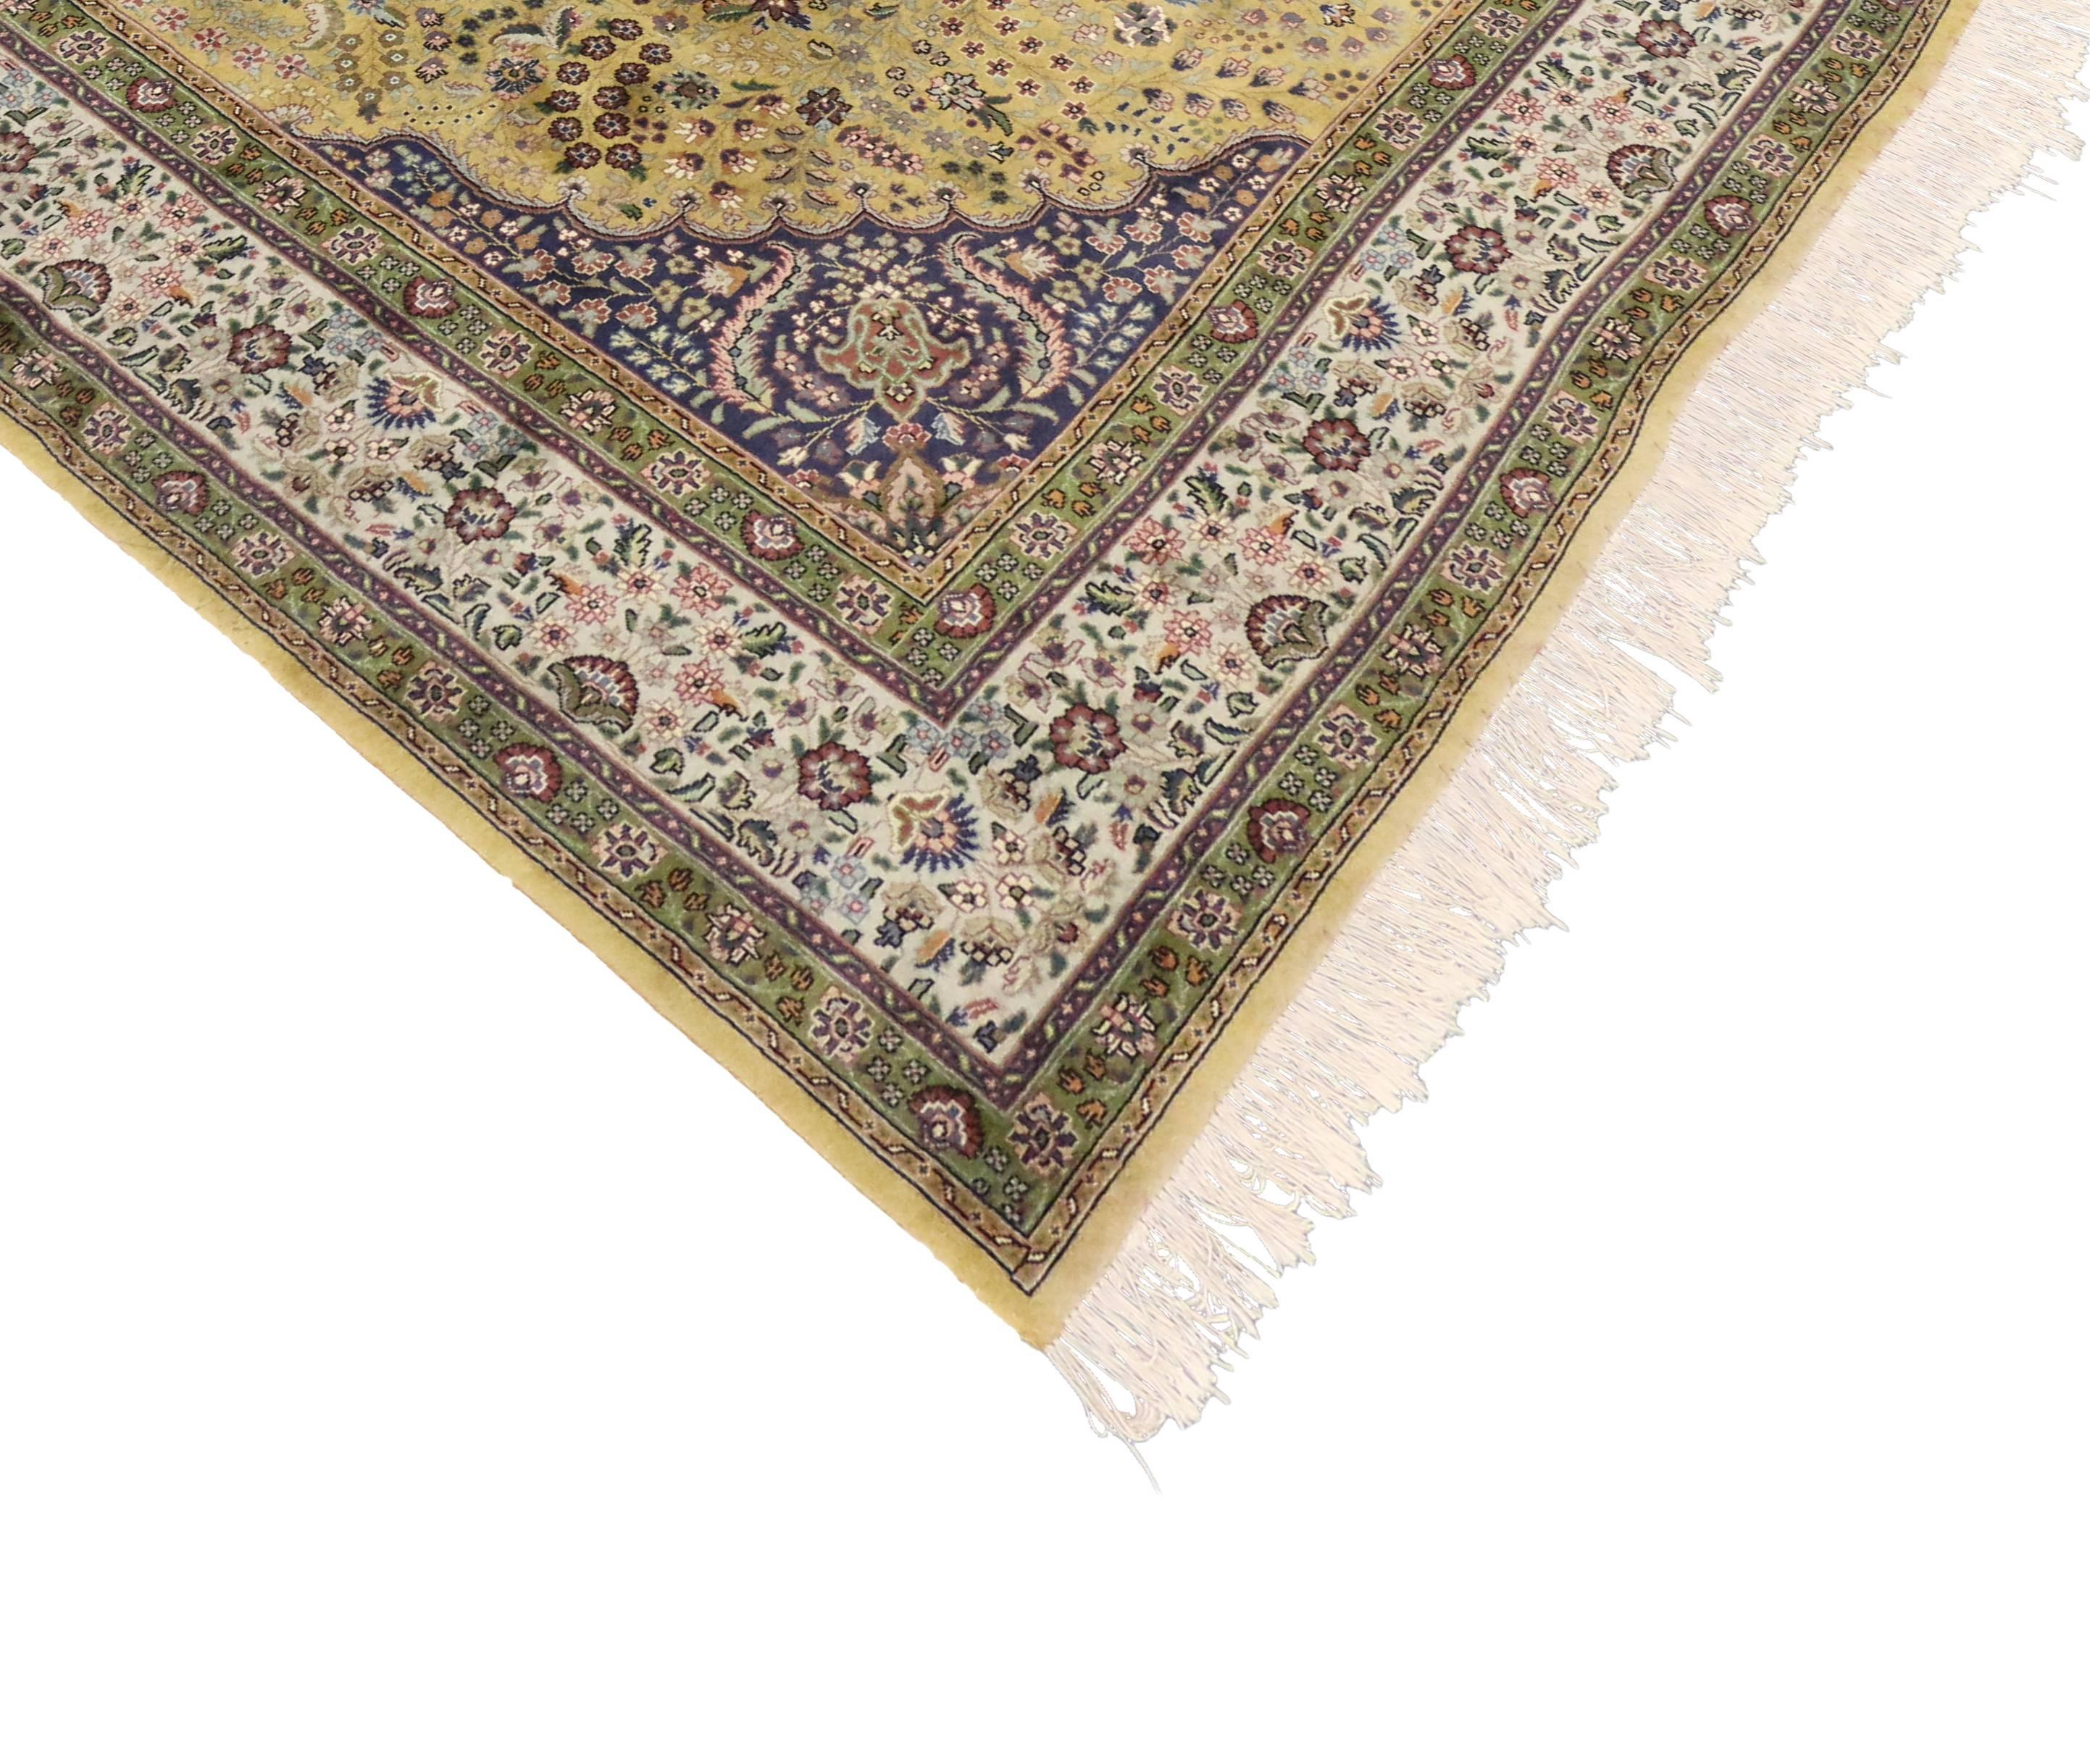 76500 Vintage Persian Tabriz Area rug with Arabesque Art Nouveau style. This hand-knotted wool vintage Persian Tabriz rug features a central medallion of mint, sage mocha and cream floating in a field of light saffron dotted with delicate flowers.